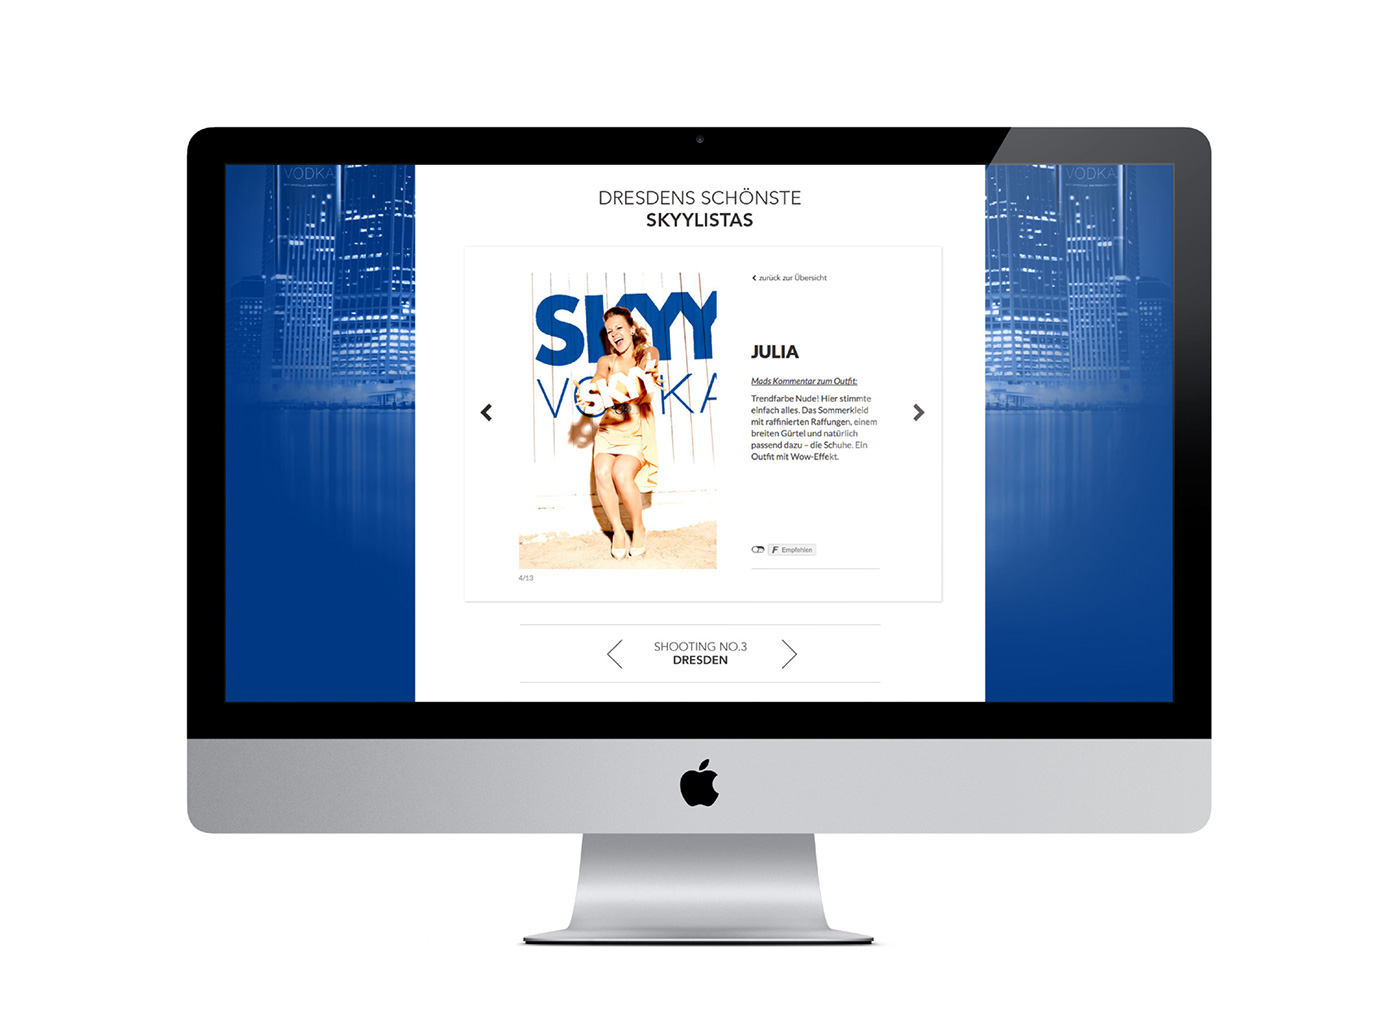 brand skyy vodka Website relaunch shooting Style liquor Nightlife Content Marketing wireframing concept UI ux